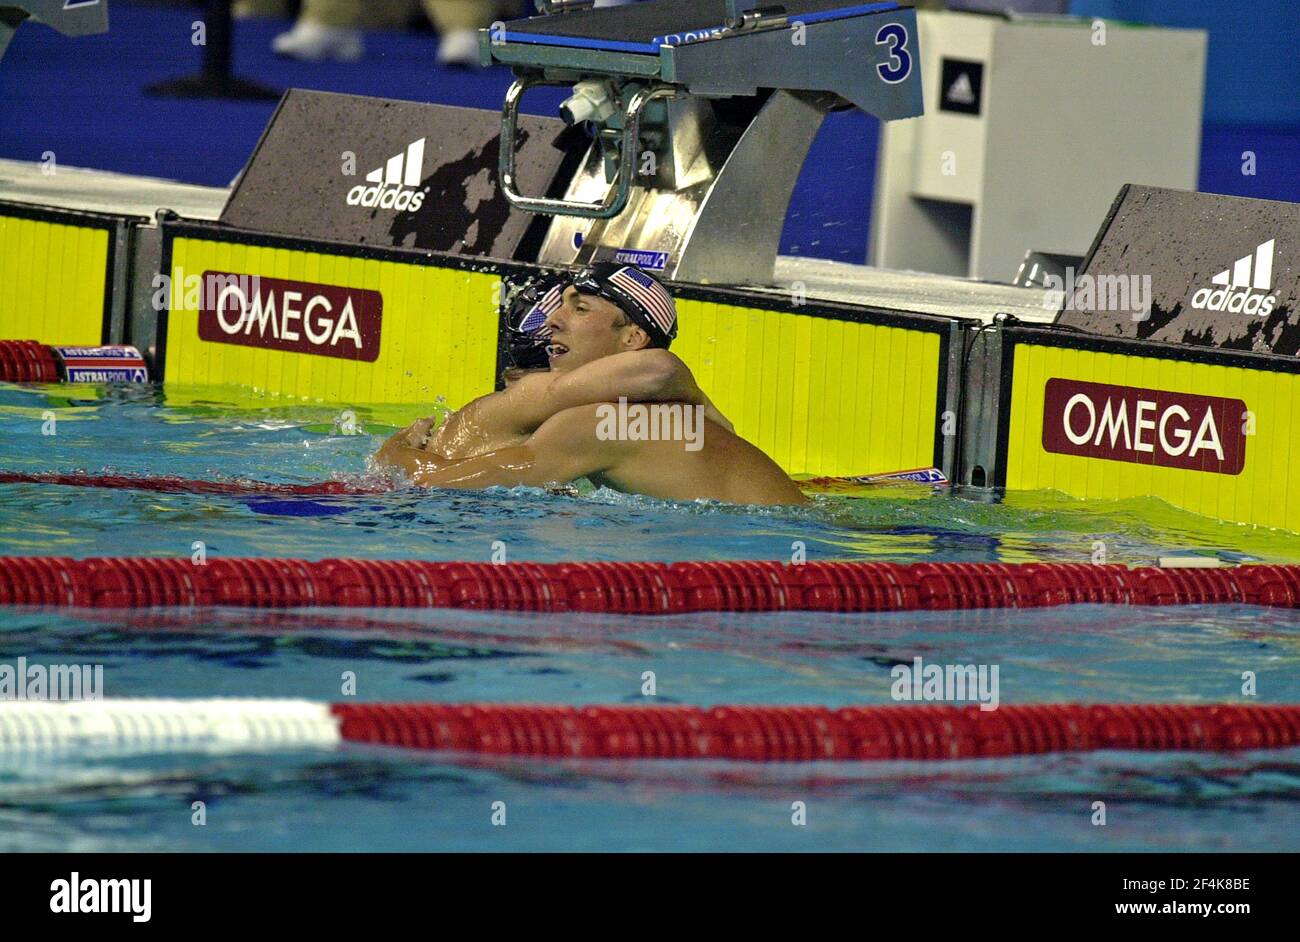 Olympic golden medals winner Michael Phelps of US swimming during the World Championship, in Barcelona 2003. Stock Photo